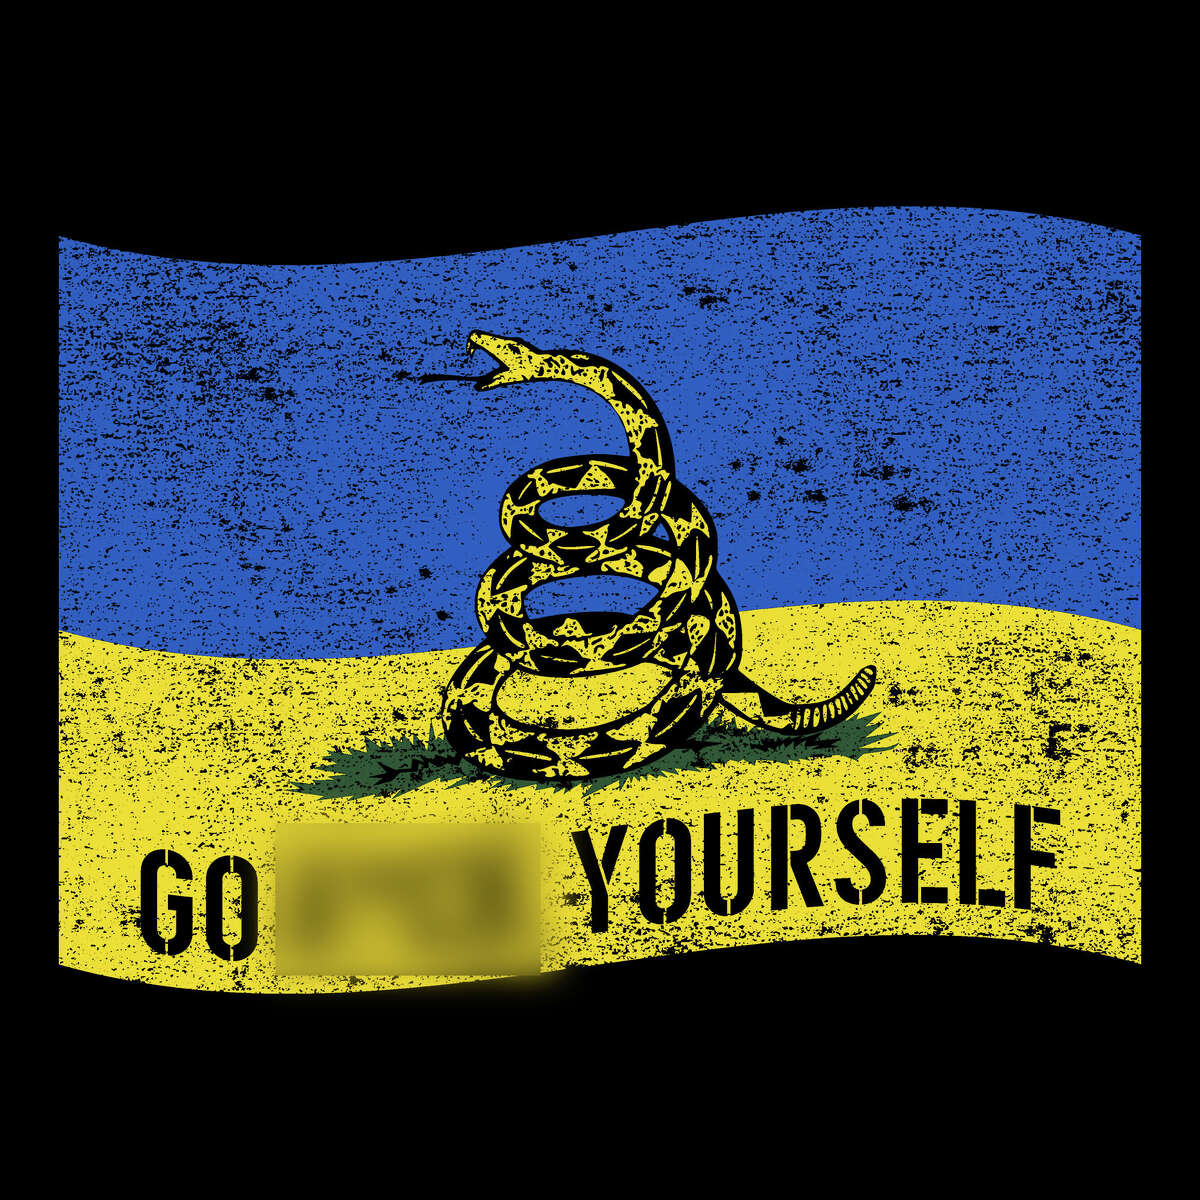 Grunt Style, a military-themed clothing brand headquartered in San Antonio, has raised $185,000 in one week to help offer aid in Ukrainian evacuation efforts with its latest T-shirt design. 